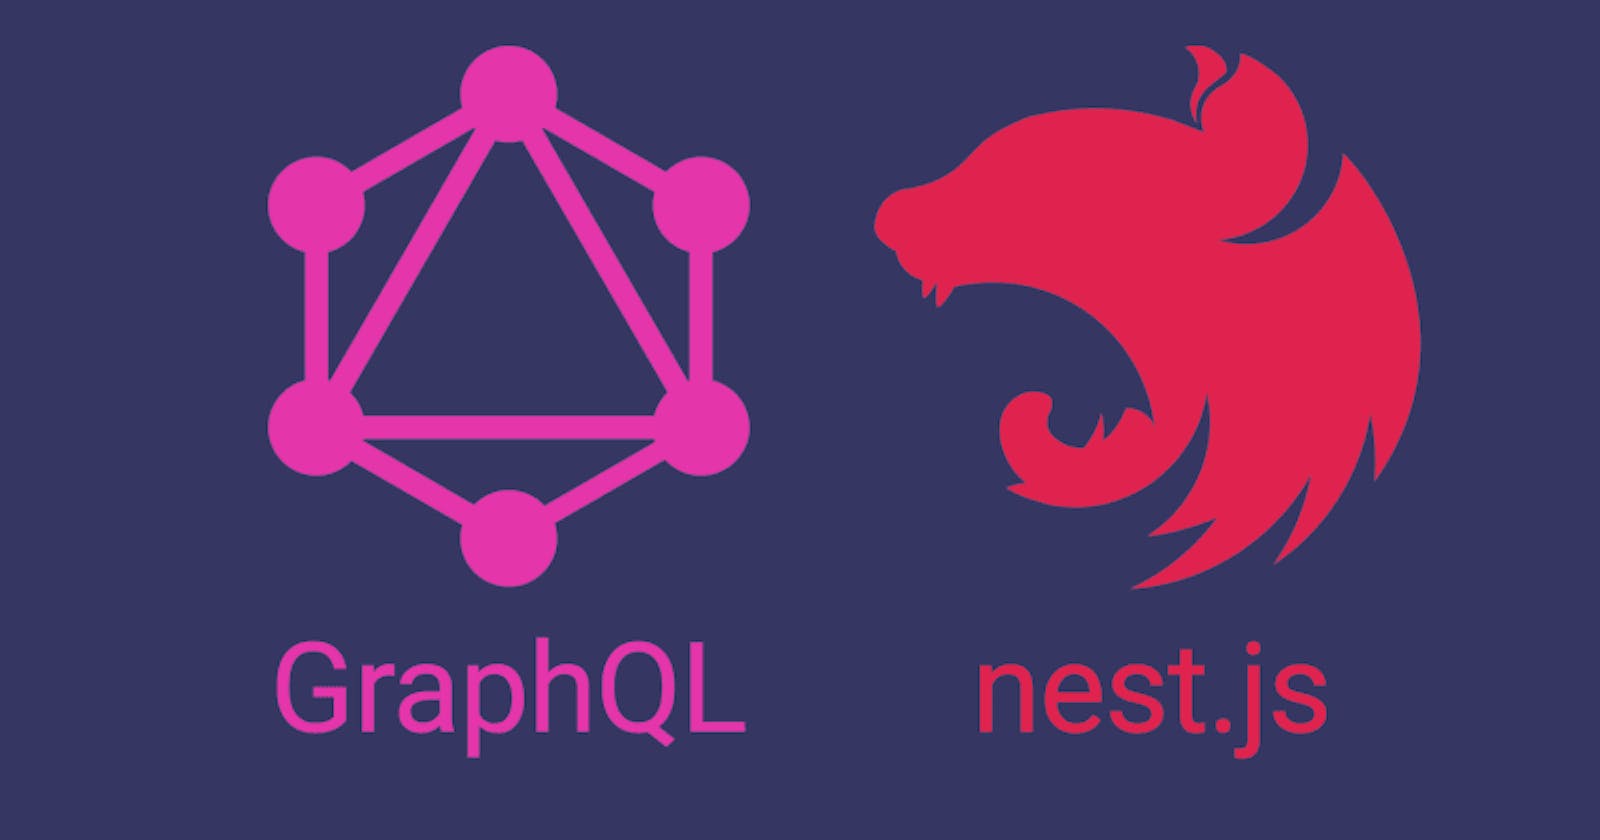 Building a NestJS GraphQL Microservice and Connecting it to a Flutter App